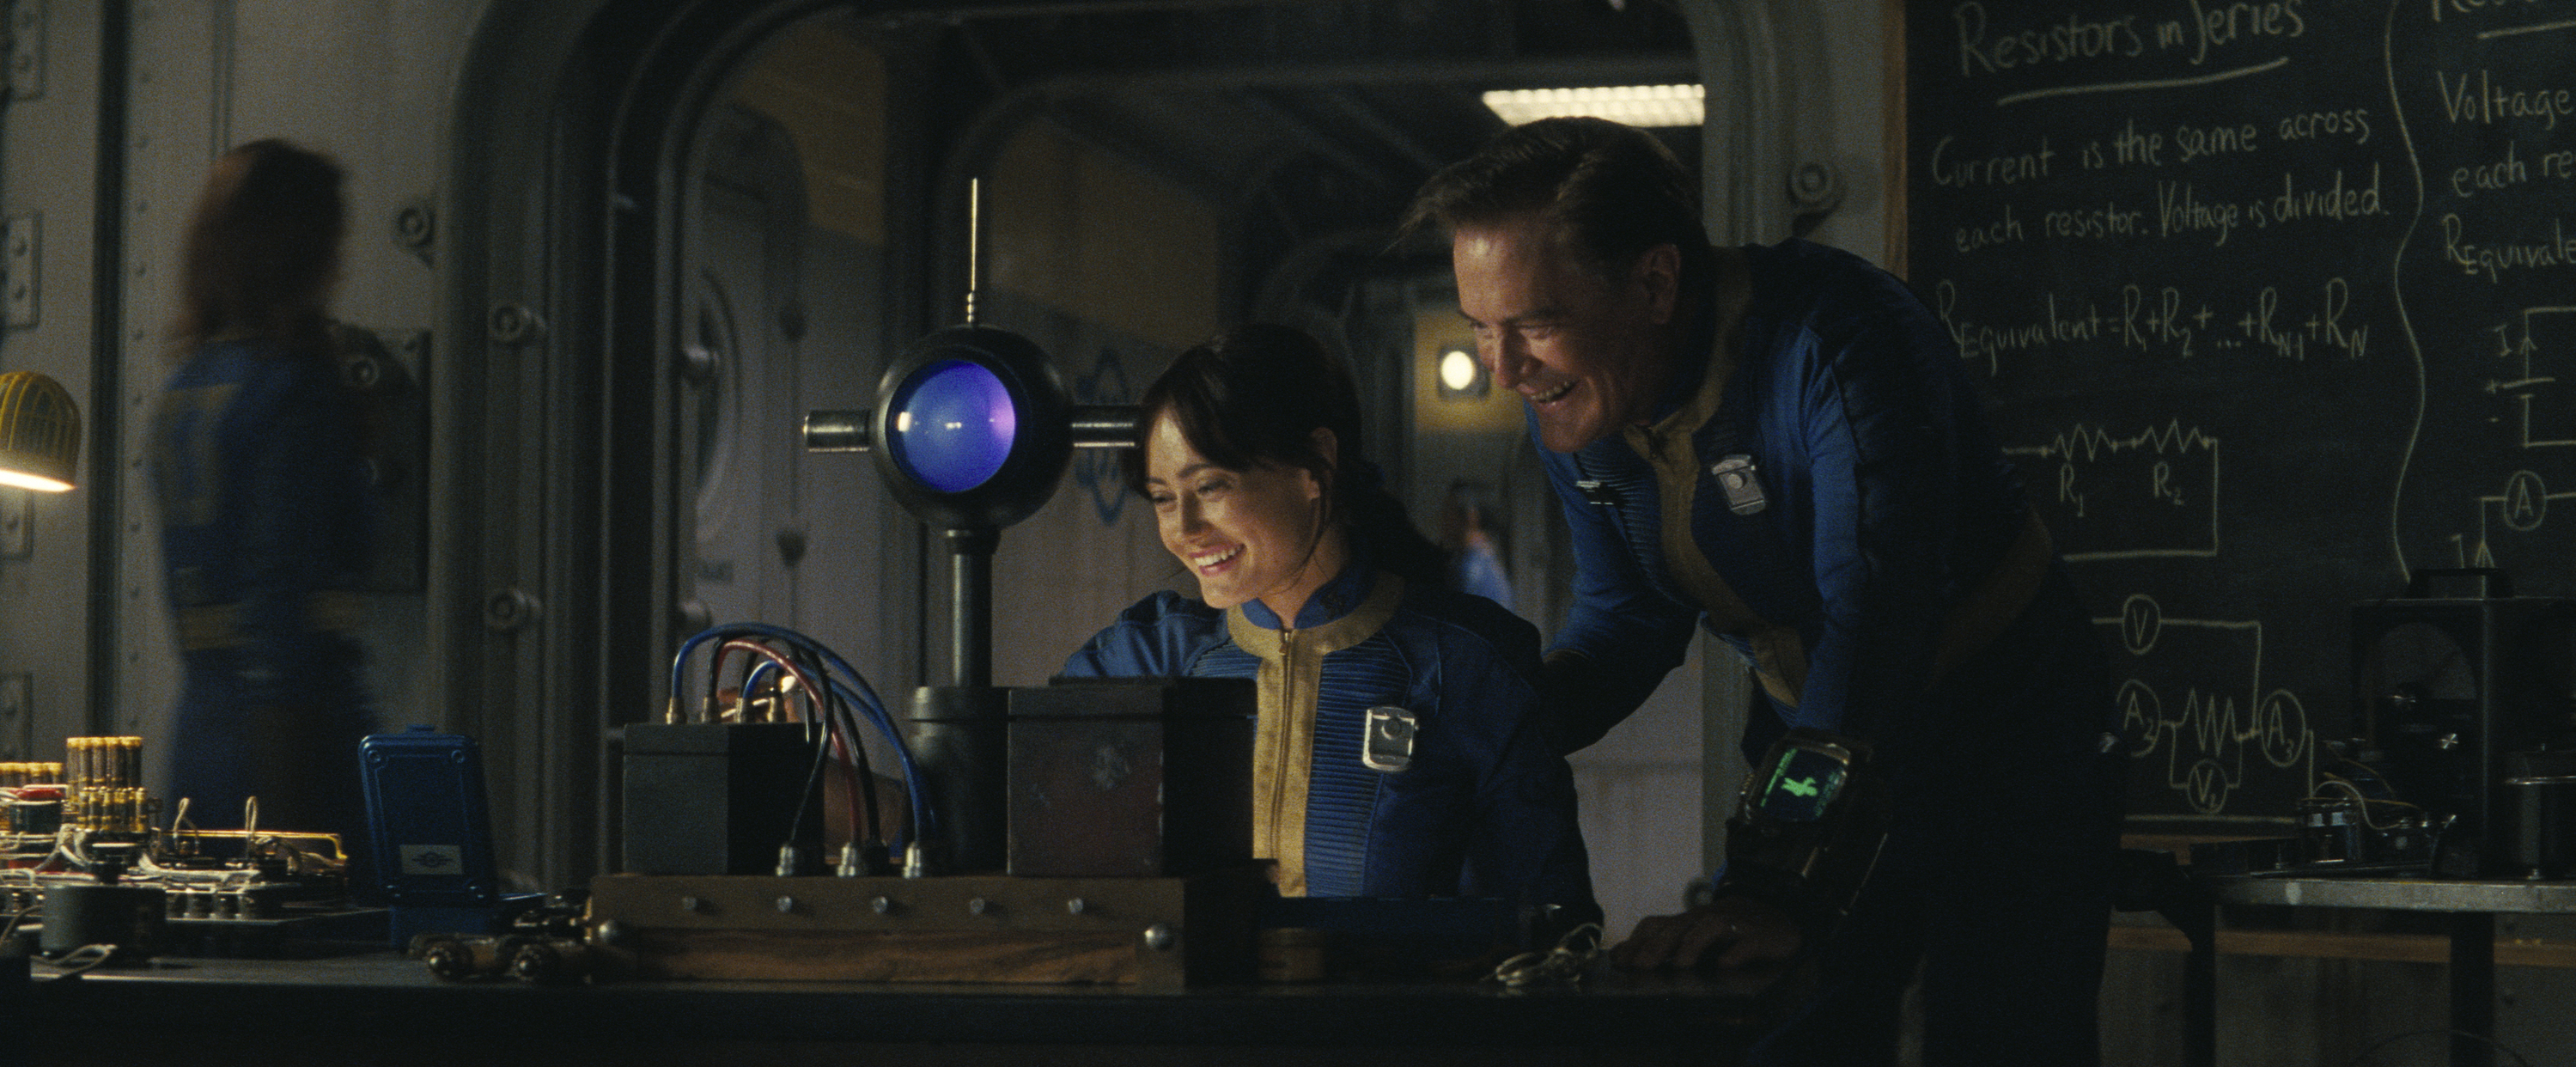 lucy (ella purnell) and hank maclean (kyle maclachlan) do a science experiment in a classroom, in 'fallout'